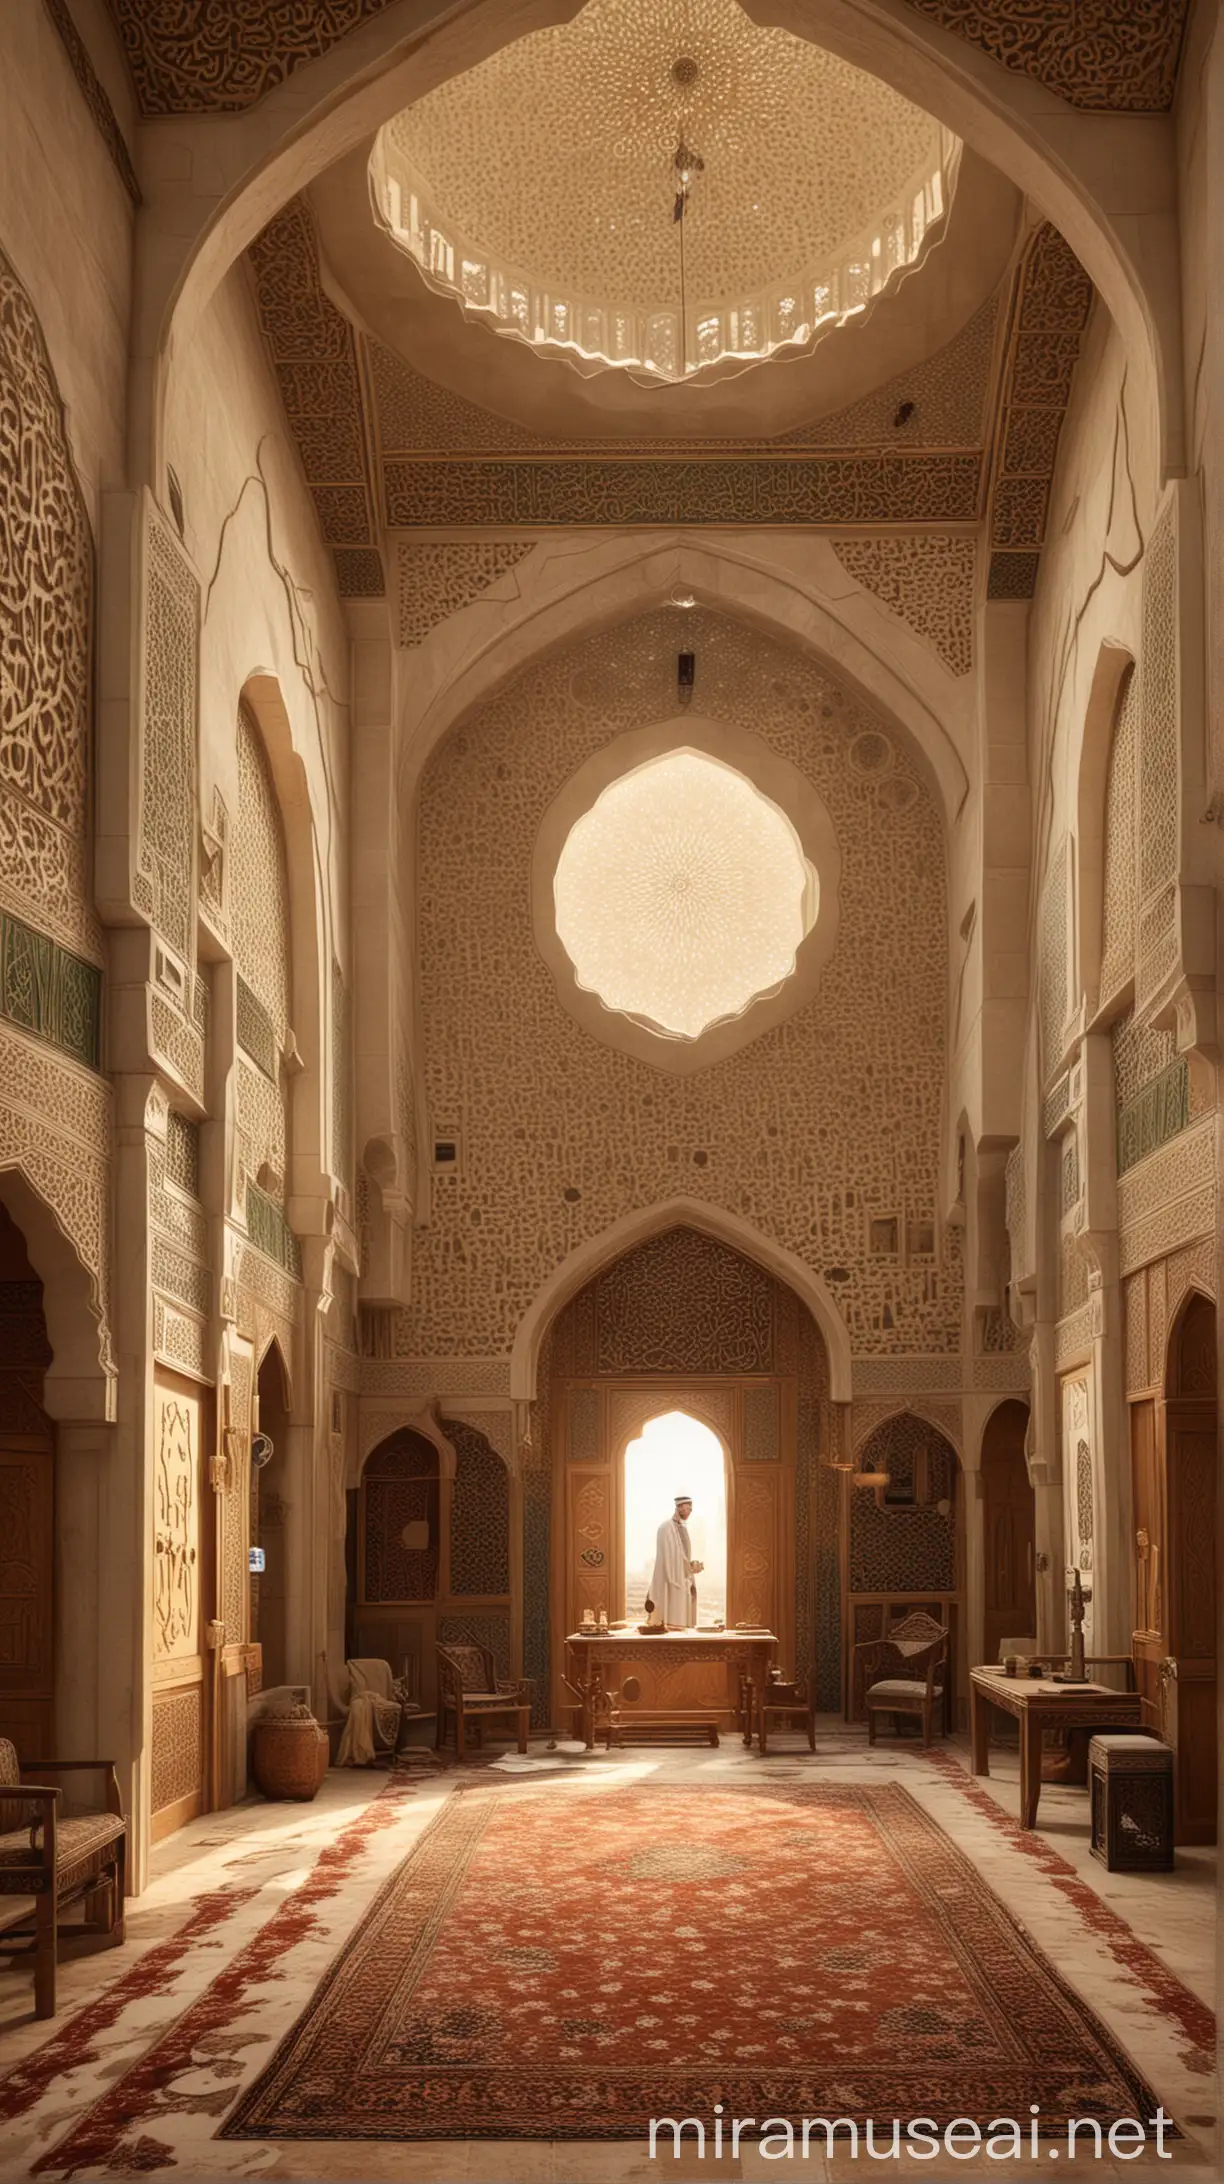 Create an illustration depicting the interior of Dar al-Arqam, the home of Prophet Muhammad (صلى الله عليه وسلم), as a place of learning and refuge for early Muslims. Show a simple yet welcoming space where Islamic teachings are imparted to the believers, highlighting the importance of knowledge and community in Islam.